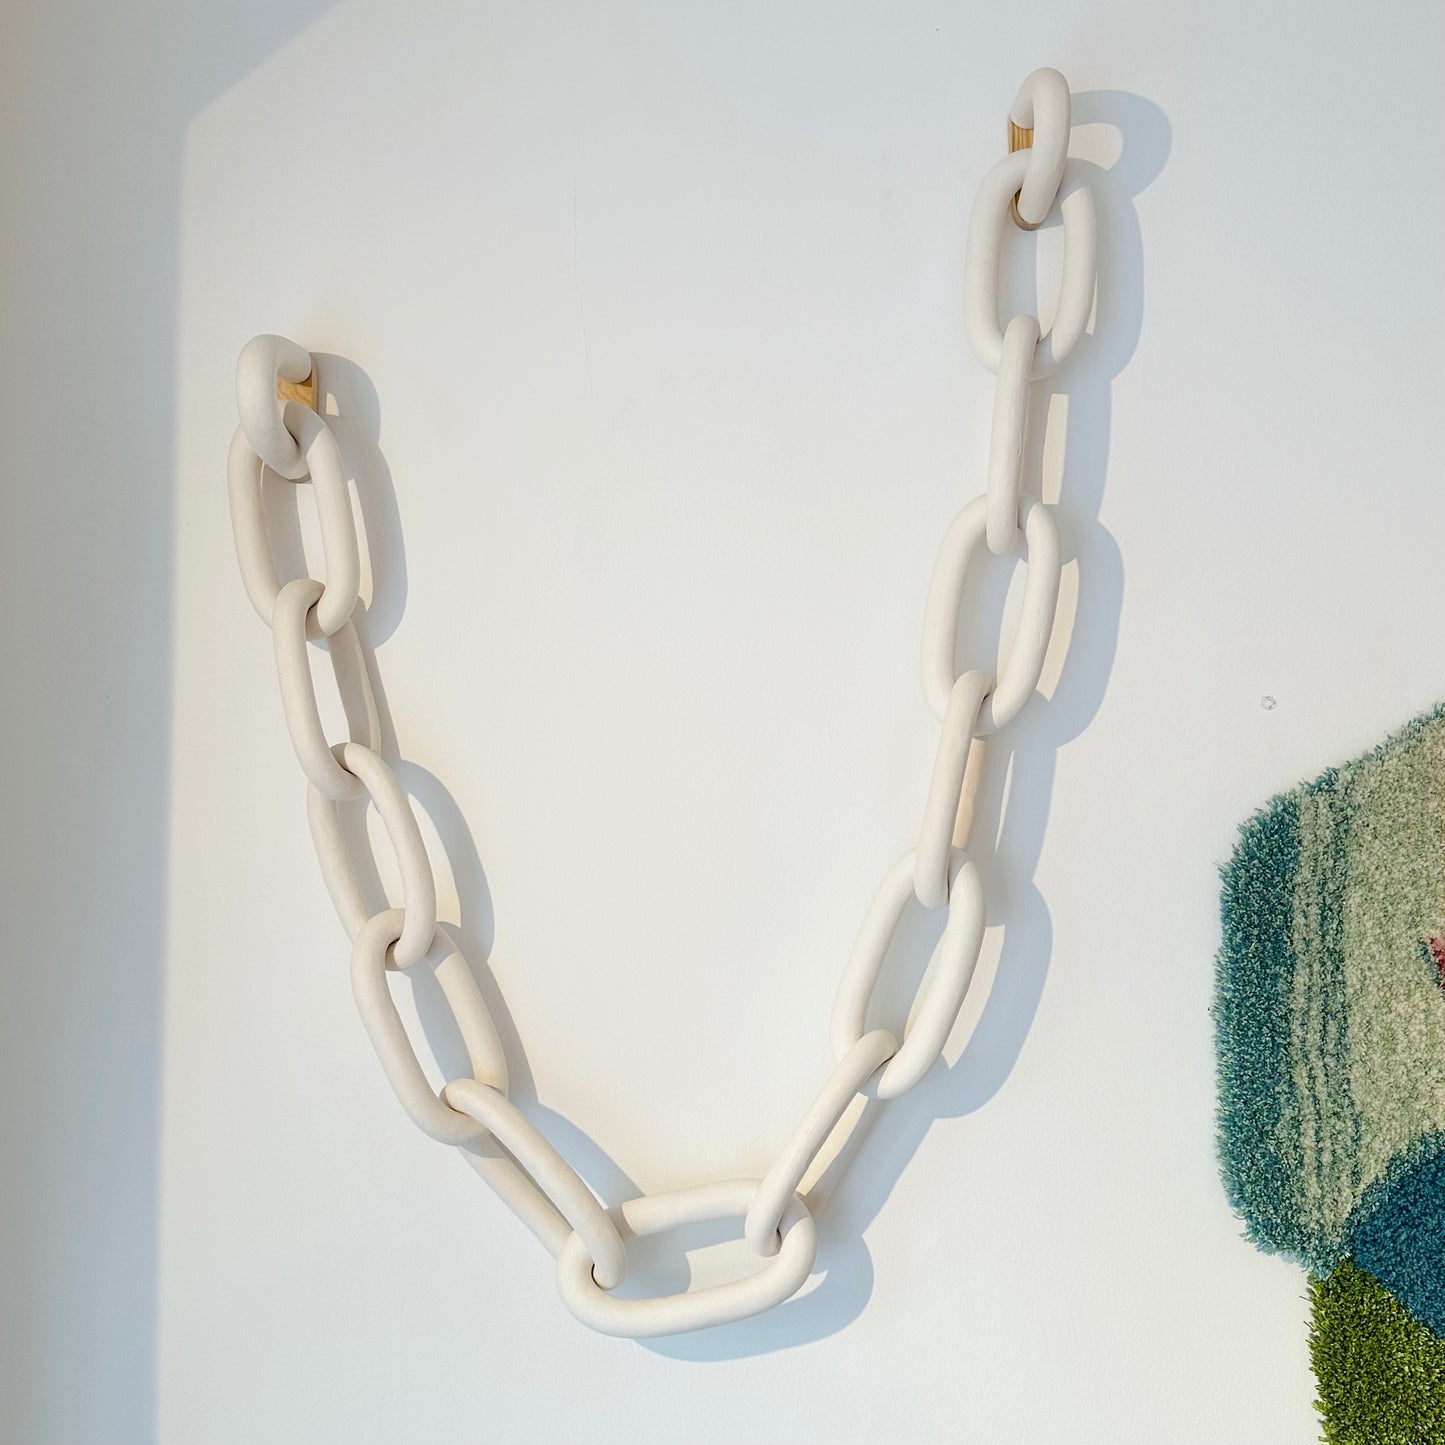 Chain (wall mounted), 12 links, by Kerstin Olsson